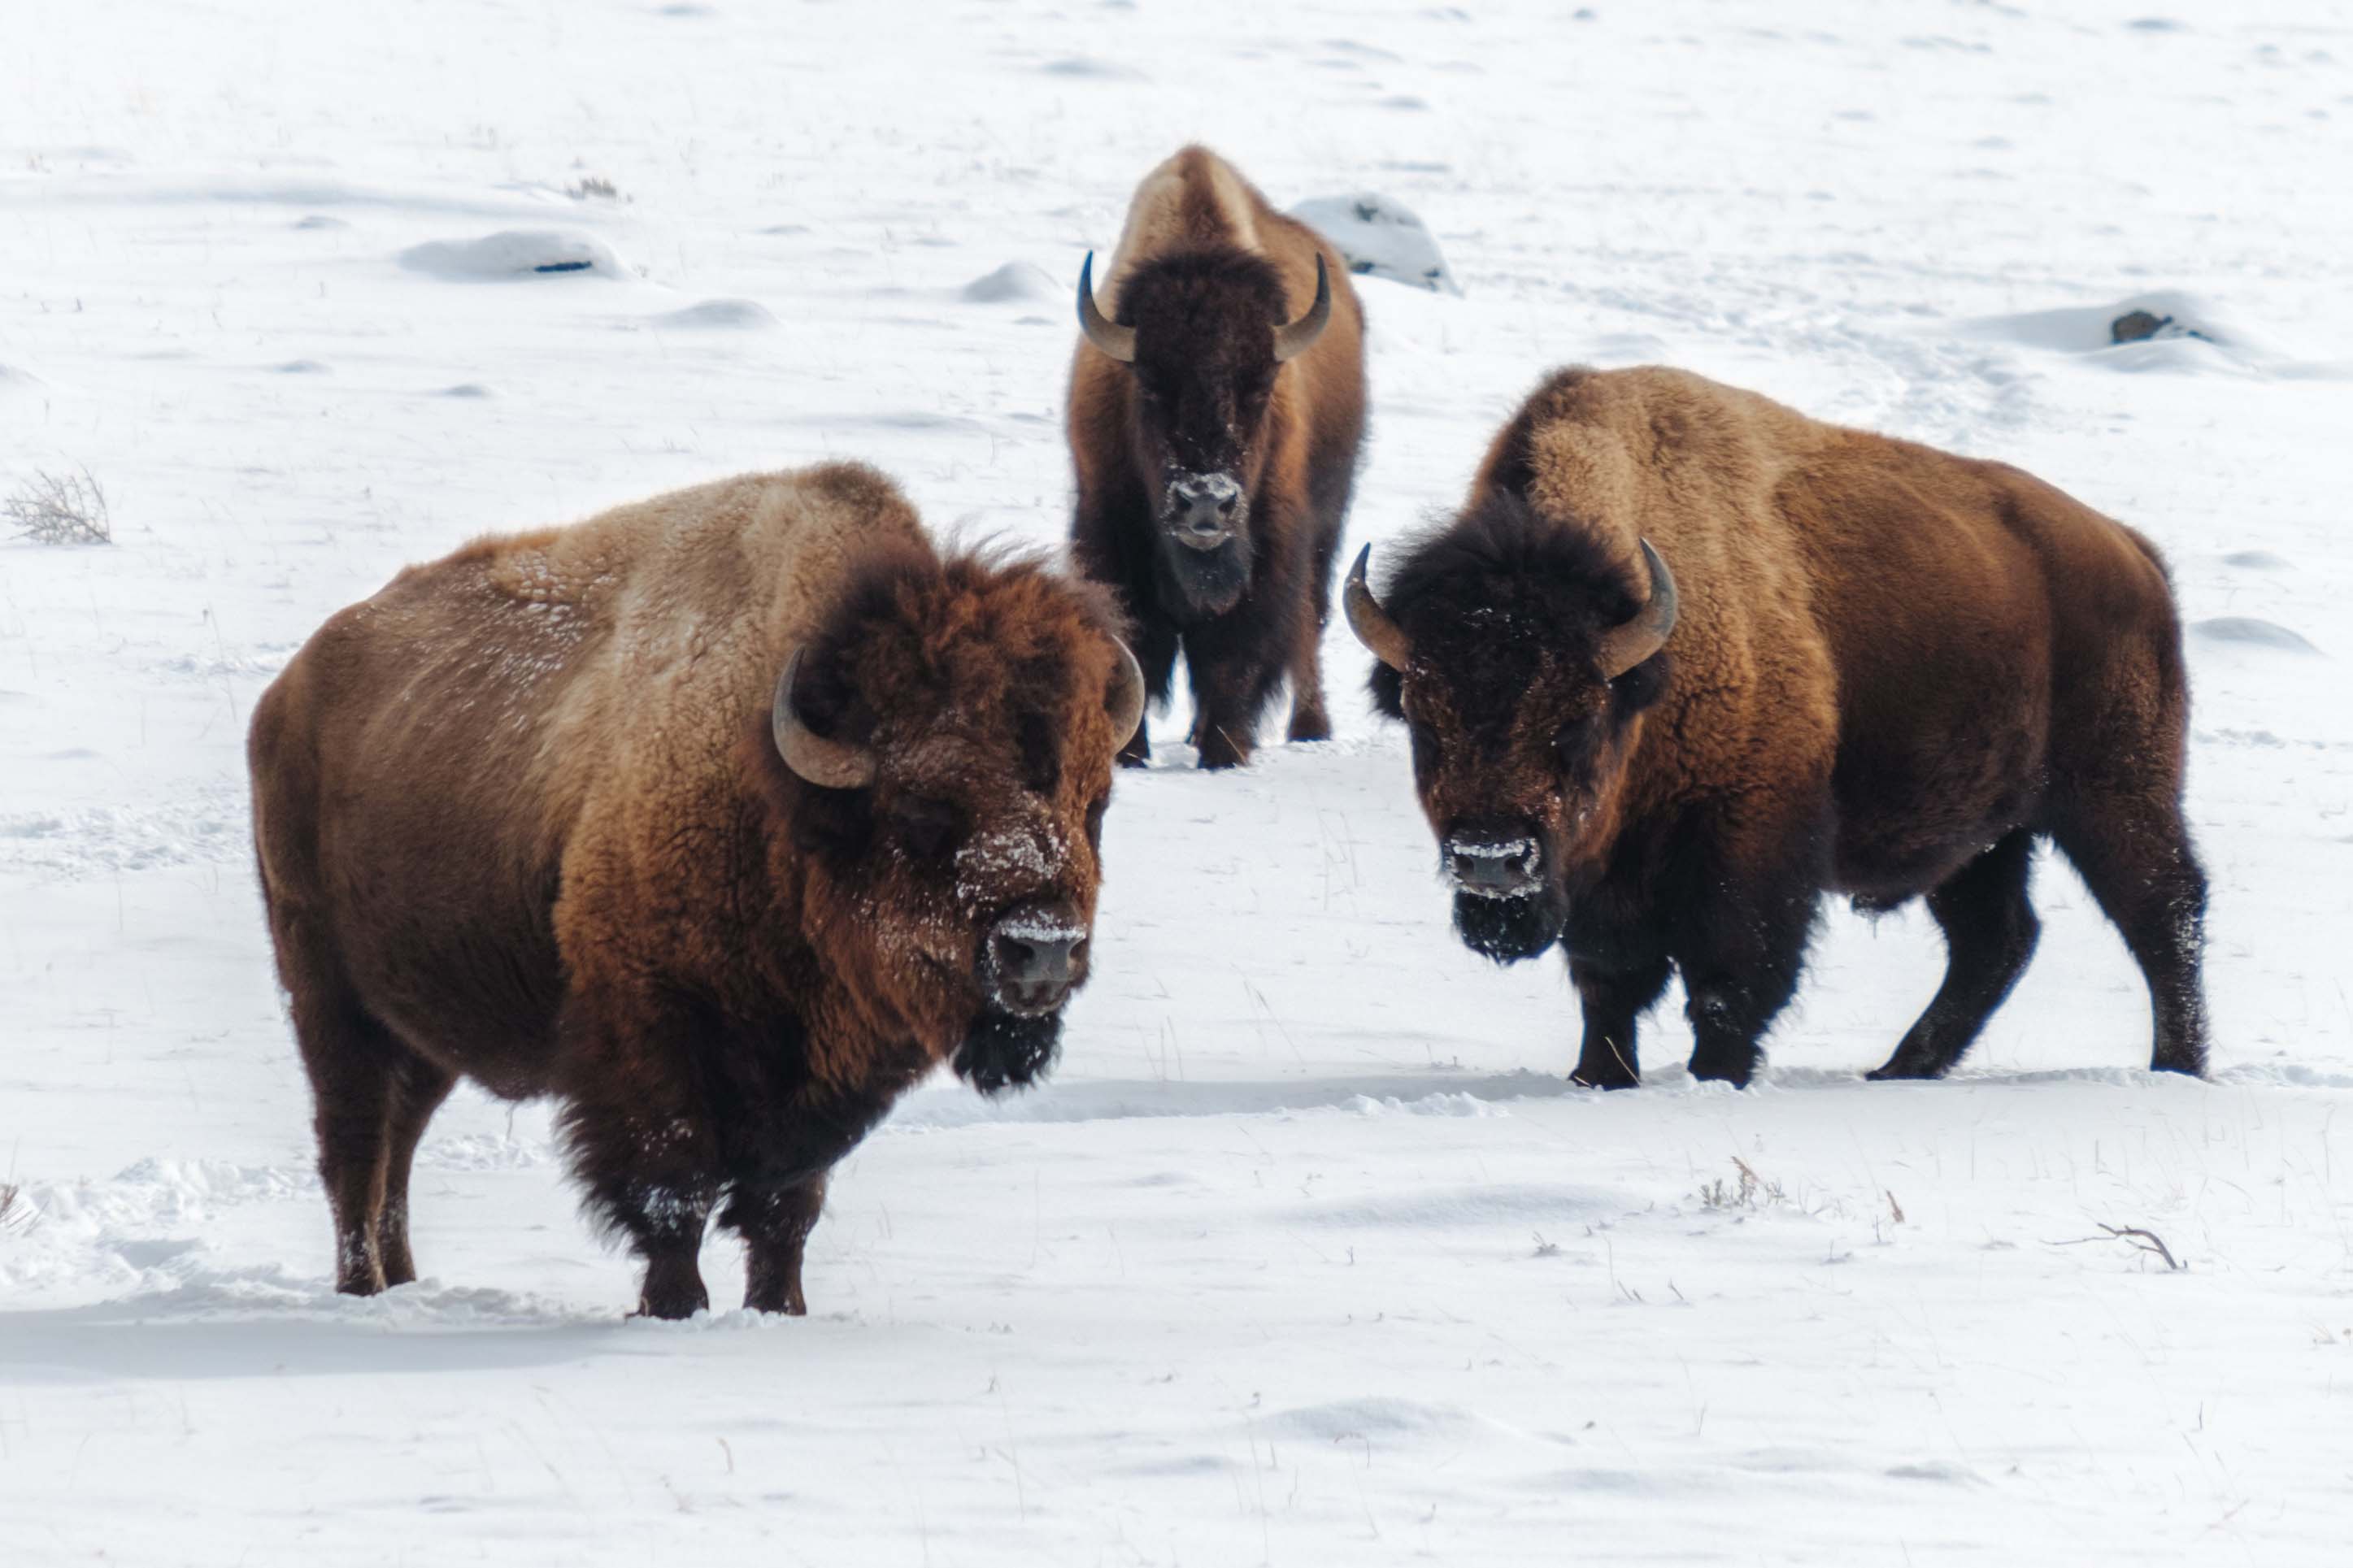 bison in Yellowstone National Park